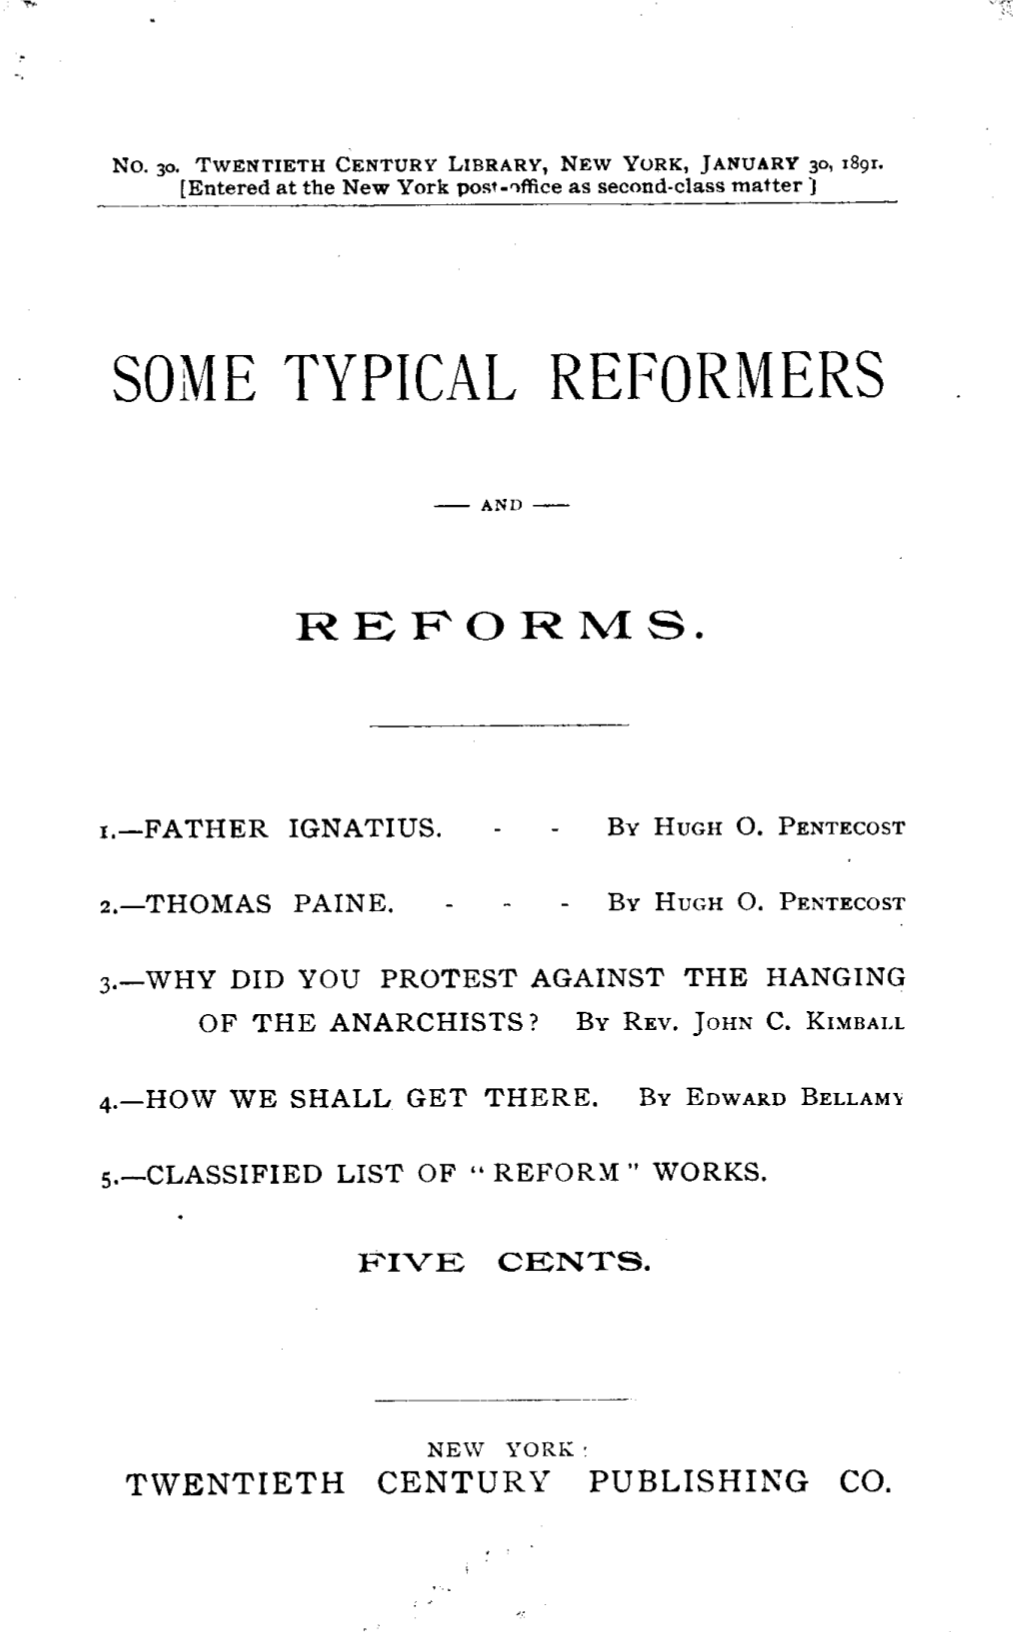 Some Typical Reformers